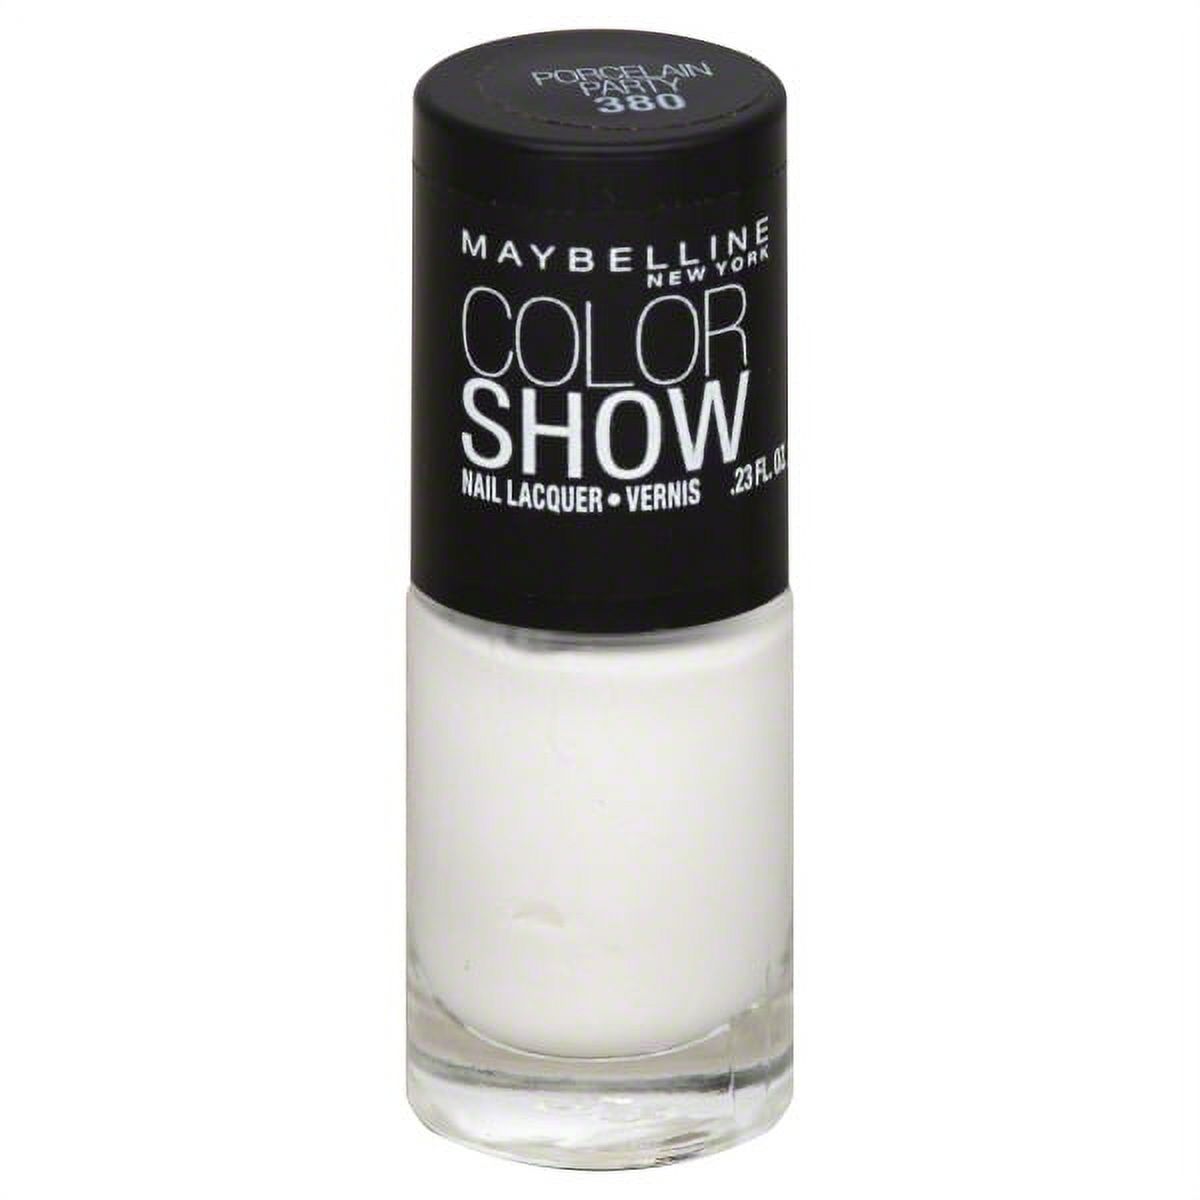 Maybelline Color Show Nail Lacquer - image 1 of 3